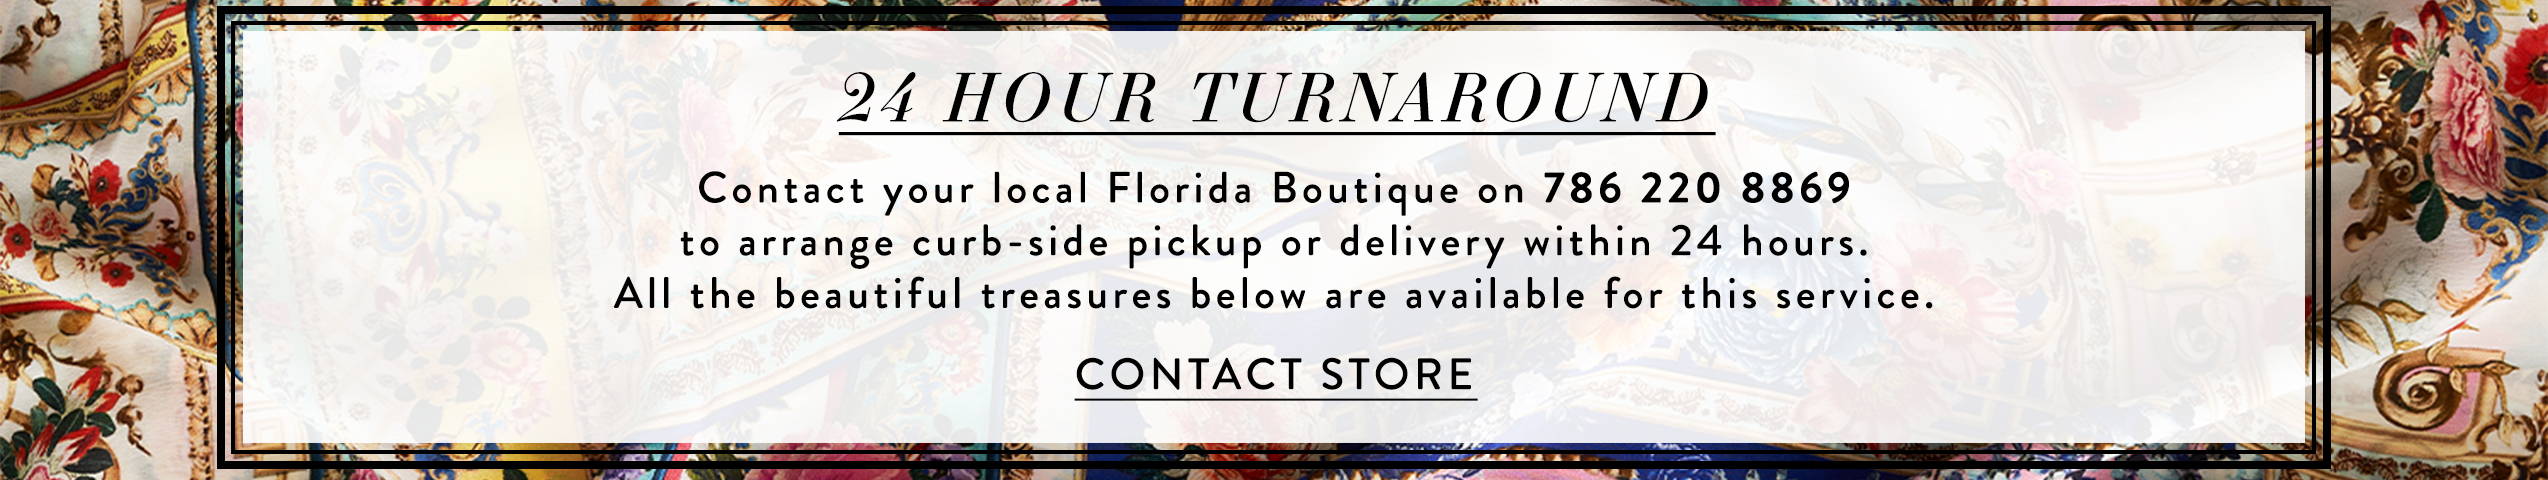 24 Hour Turnaround | Contact our Florida Boutique on 786 220 8869 for pick up or delivery in 24 hours